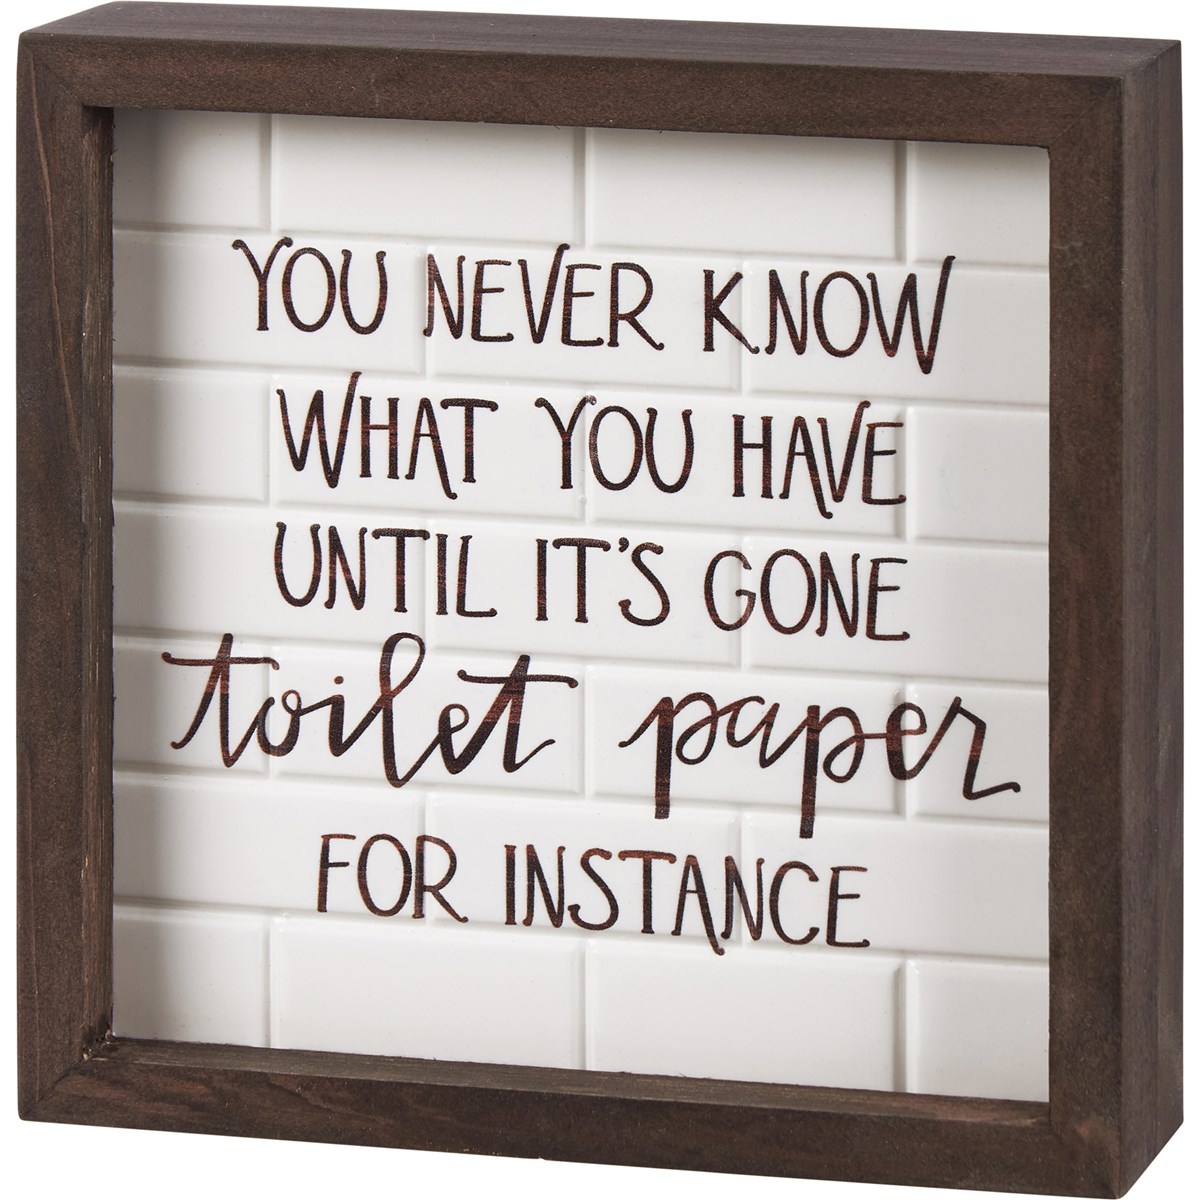 Toilet Paper For Instance Tile Inset Box Sign - Wood